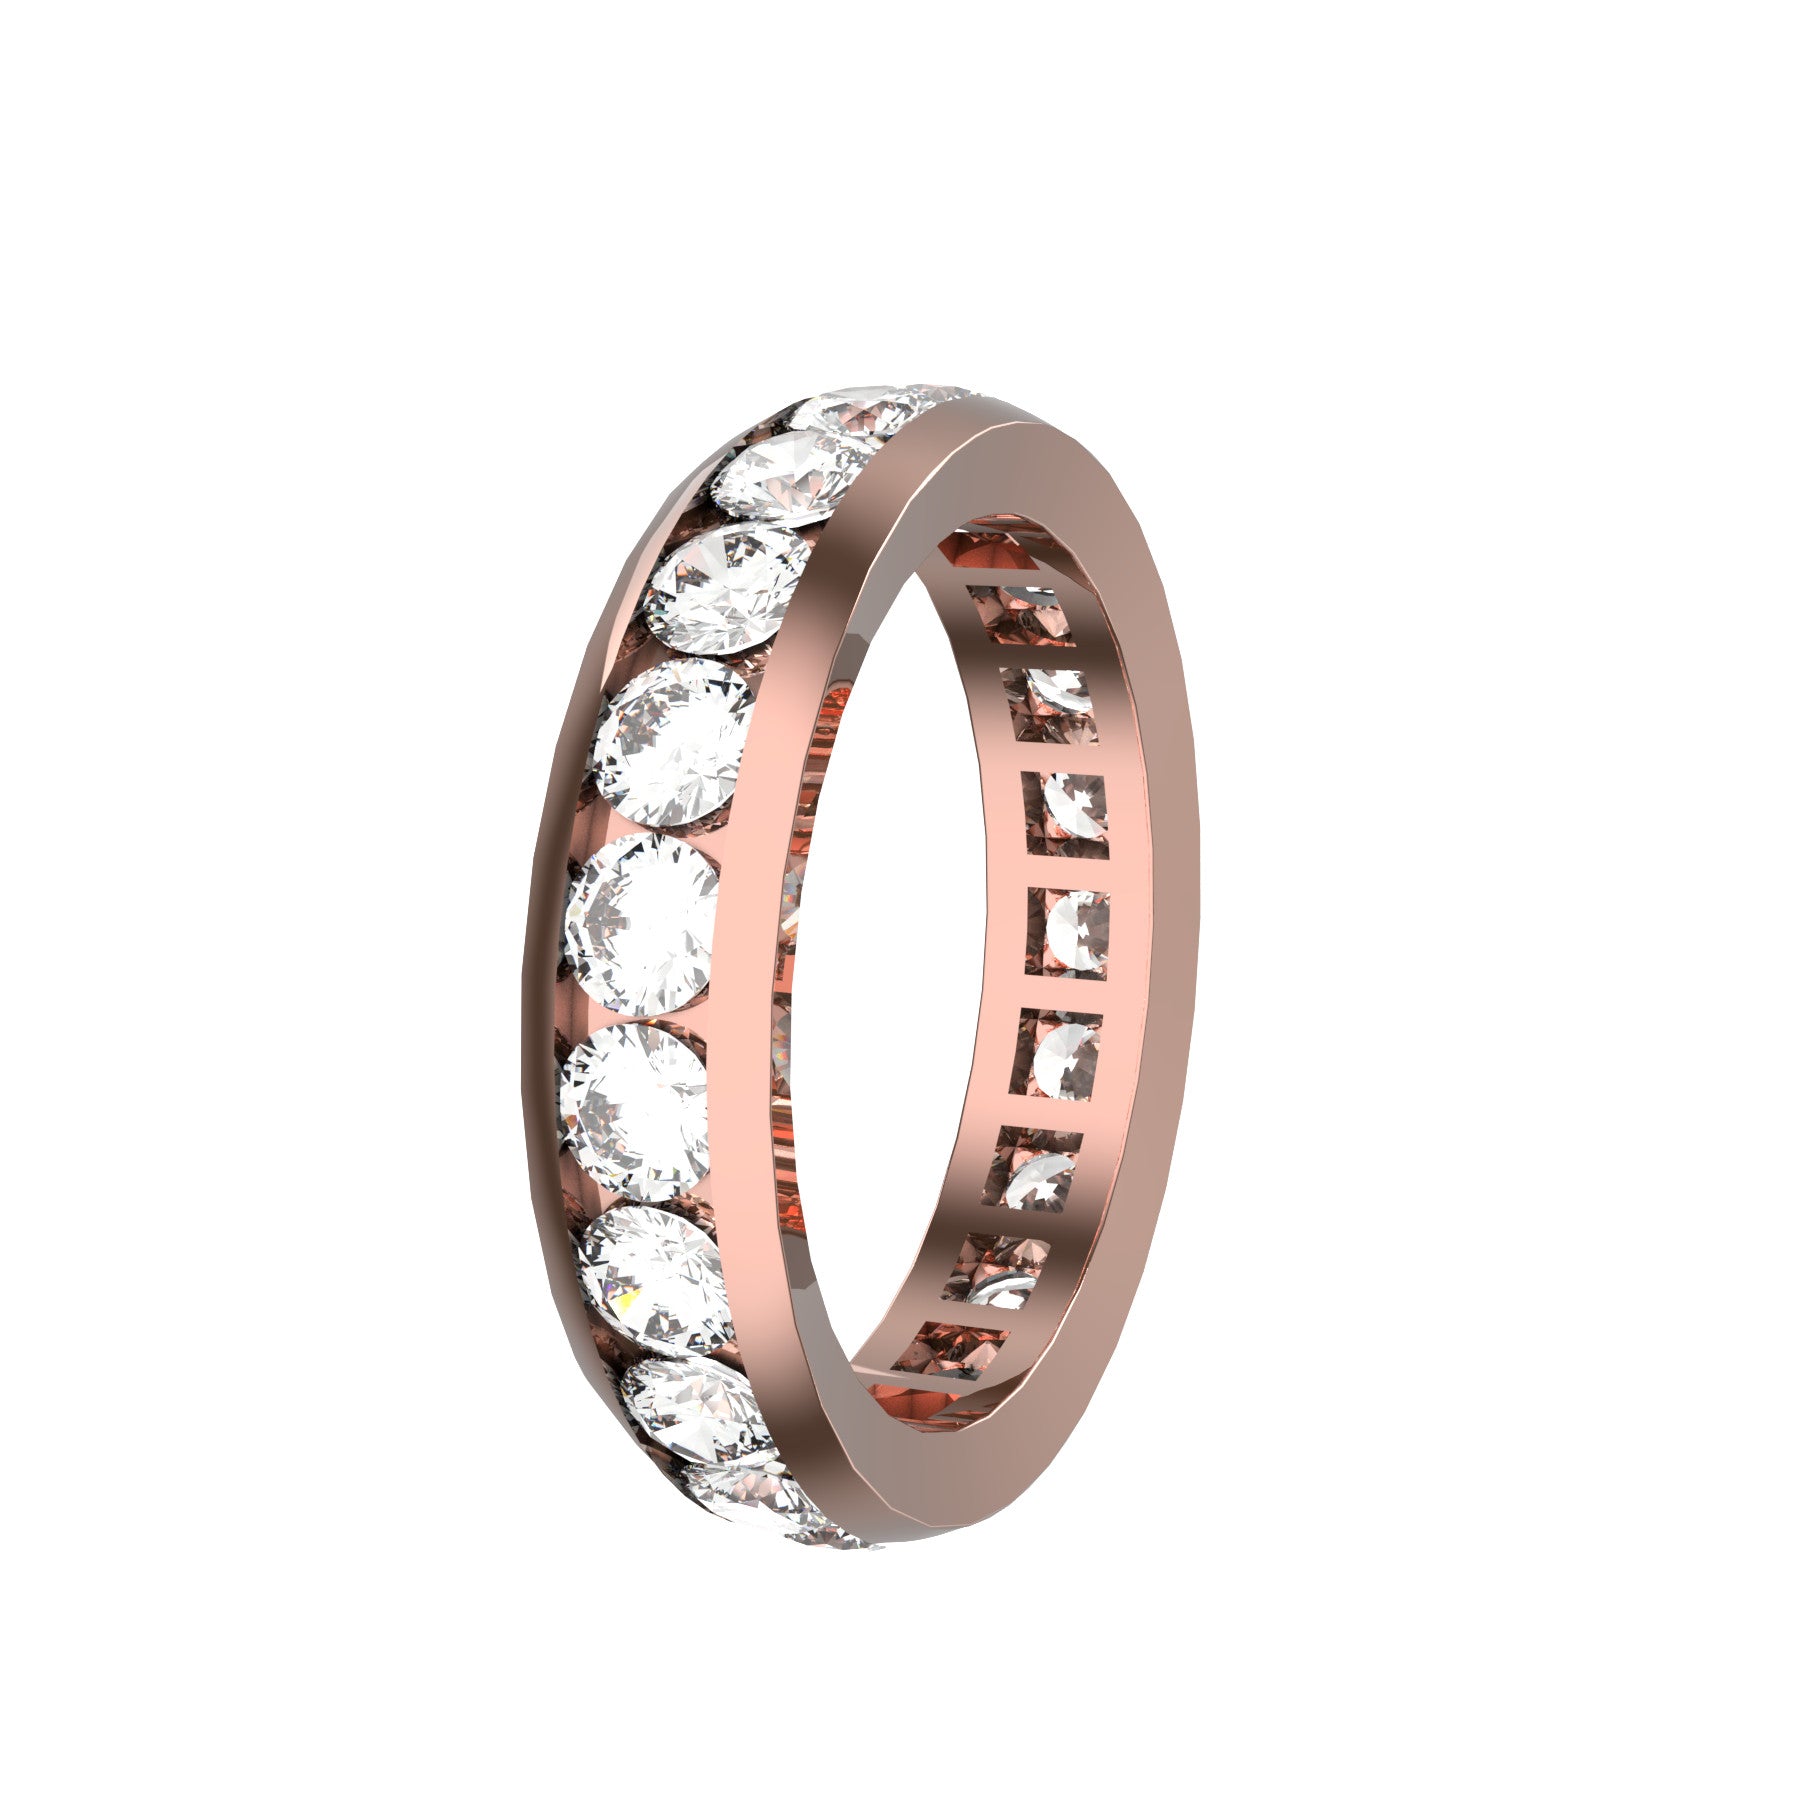 everlasting wedding band, 18 k pink gold, 0,10 ct round natural diamonds, weight about 4,70 g. (0,16 oz), width 4,70 mm